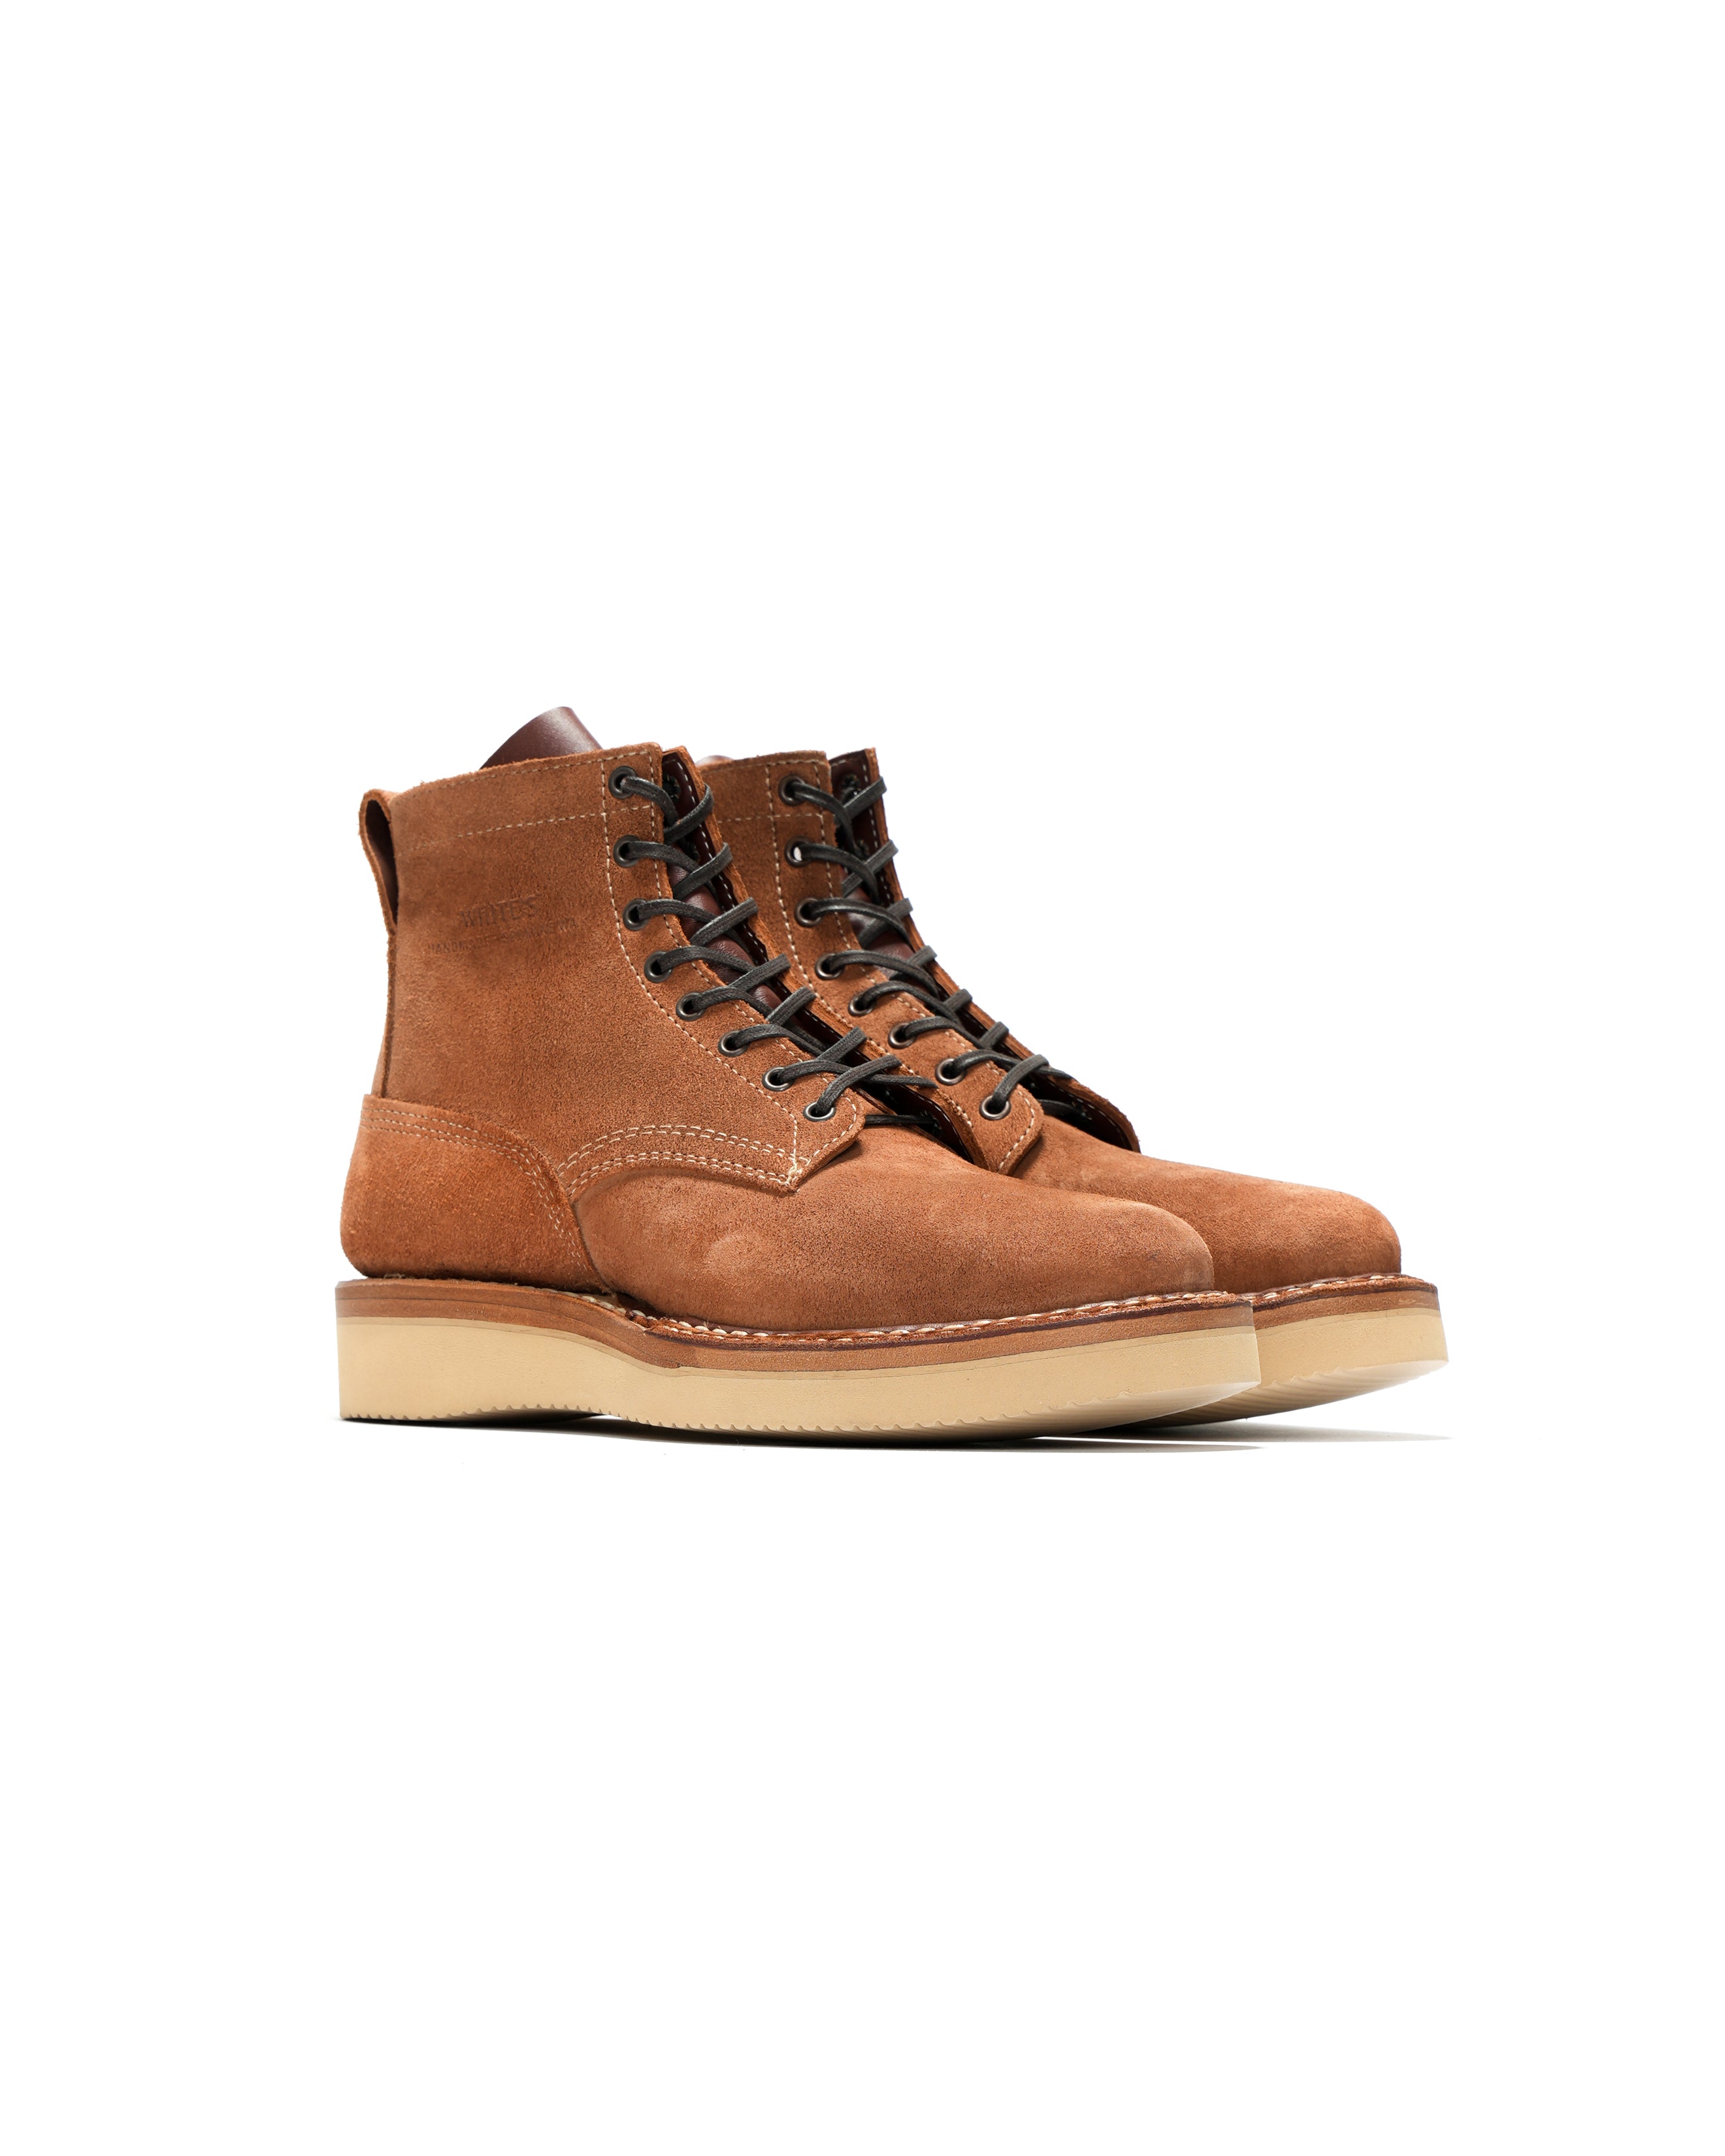 Rambler - Red Dog - Rough Out Vibram sole